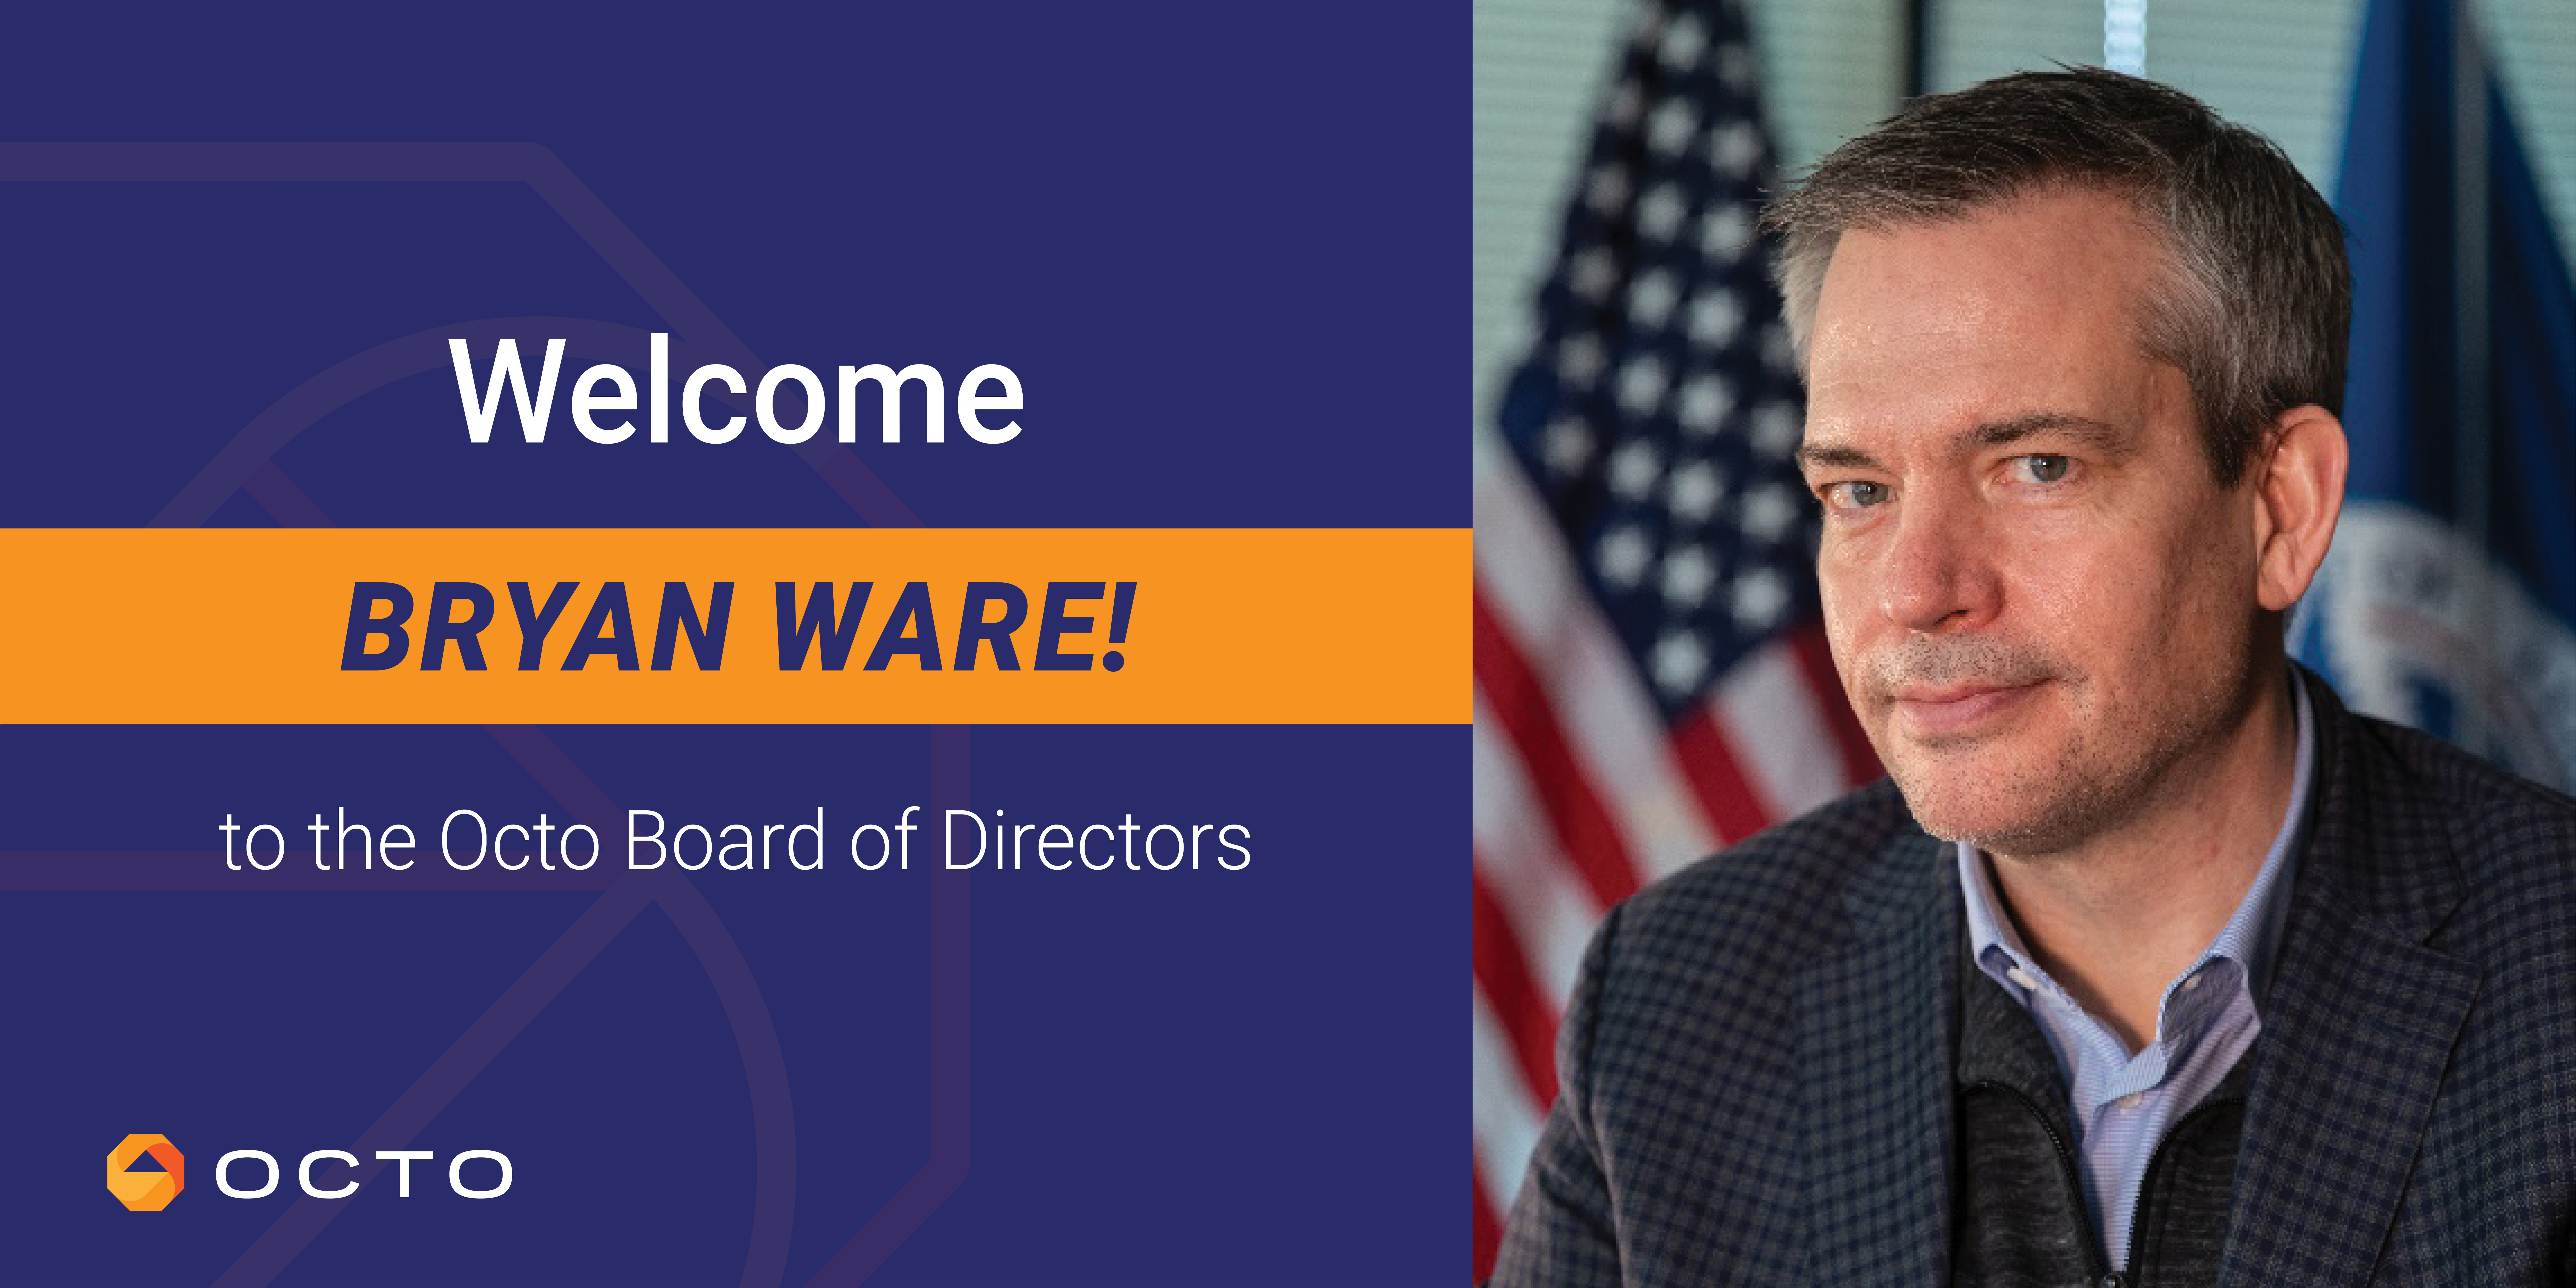 Welcome Bryan Ware to the Octo Board of Directors.